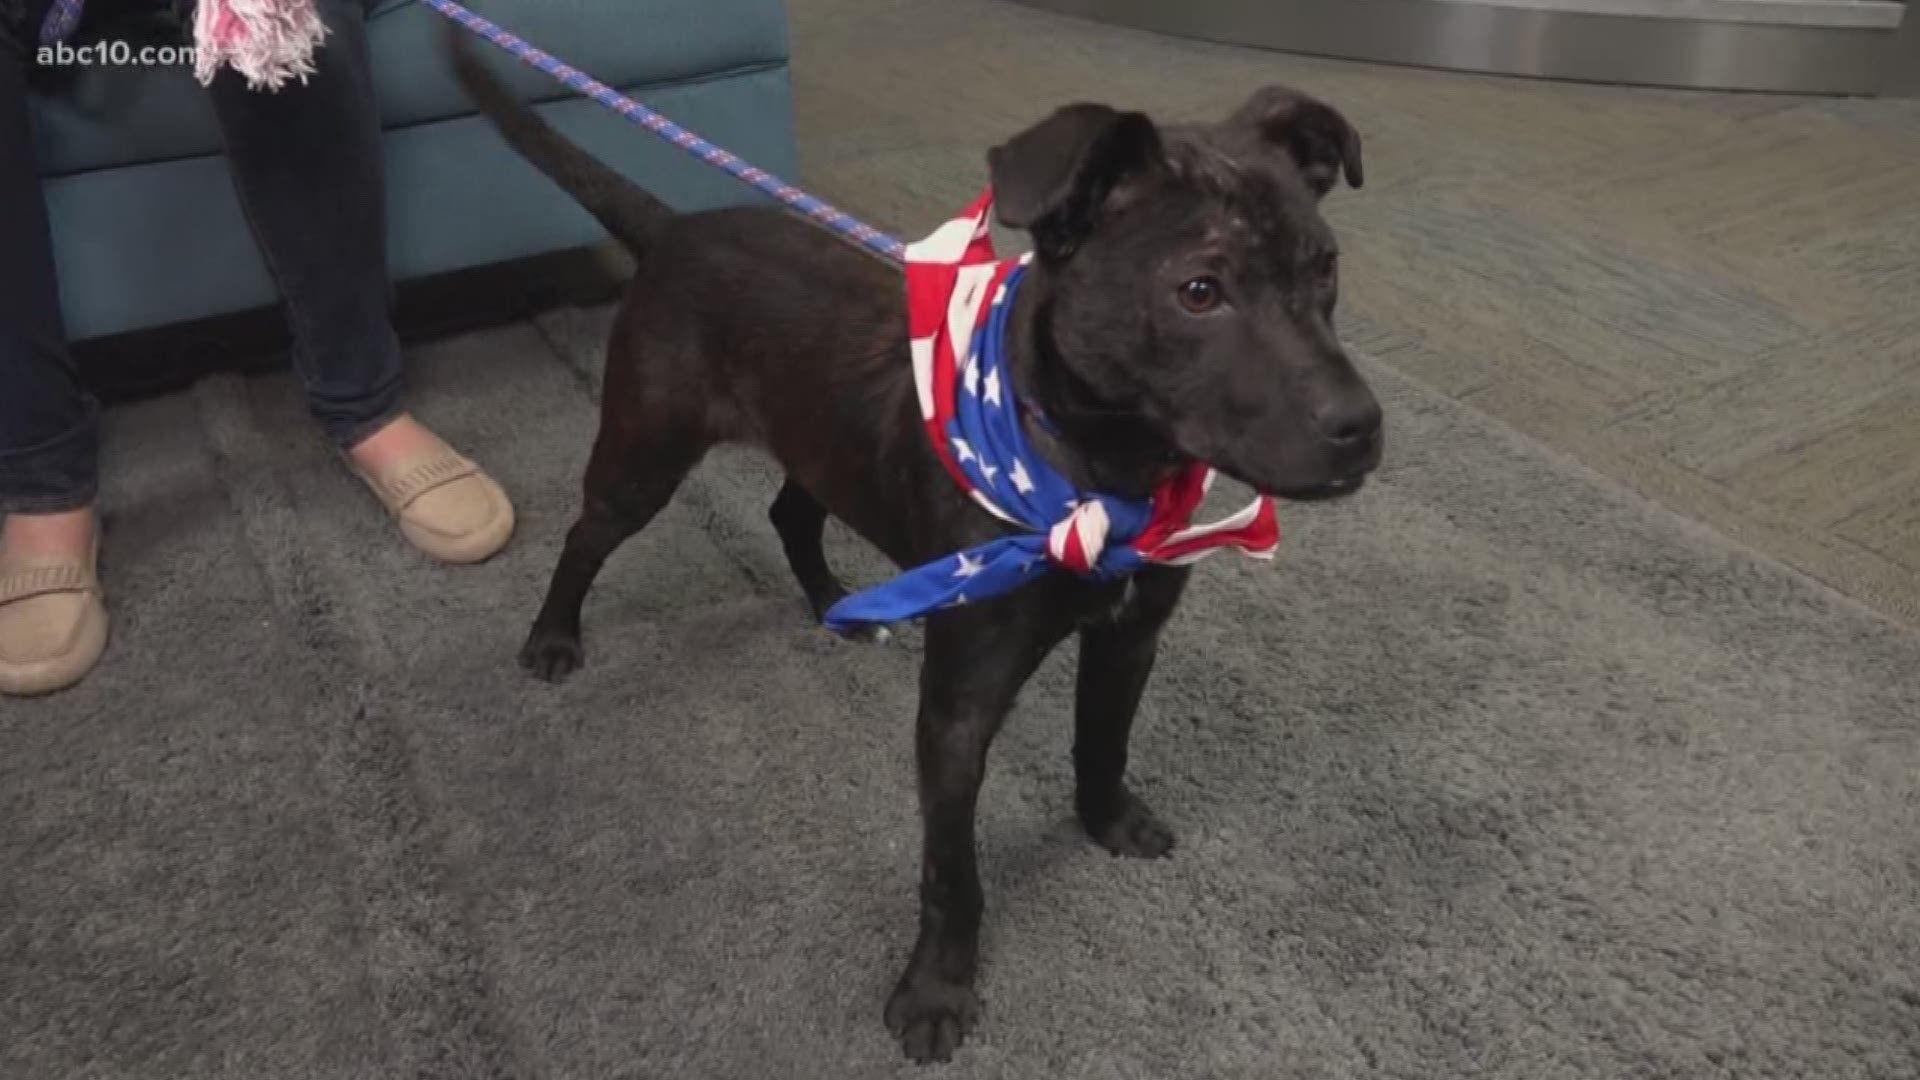 This 9-month-old Patterdale Terrier loves to play. He is energetic and would do well with children. He's up for adoption at the Stockton Animal Shelter.